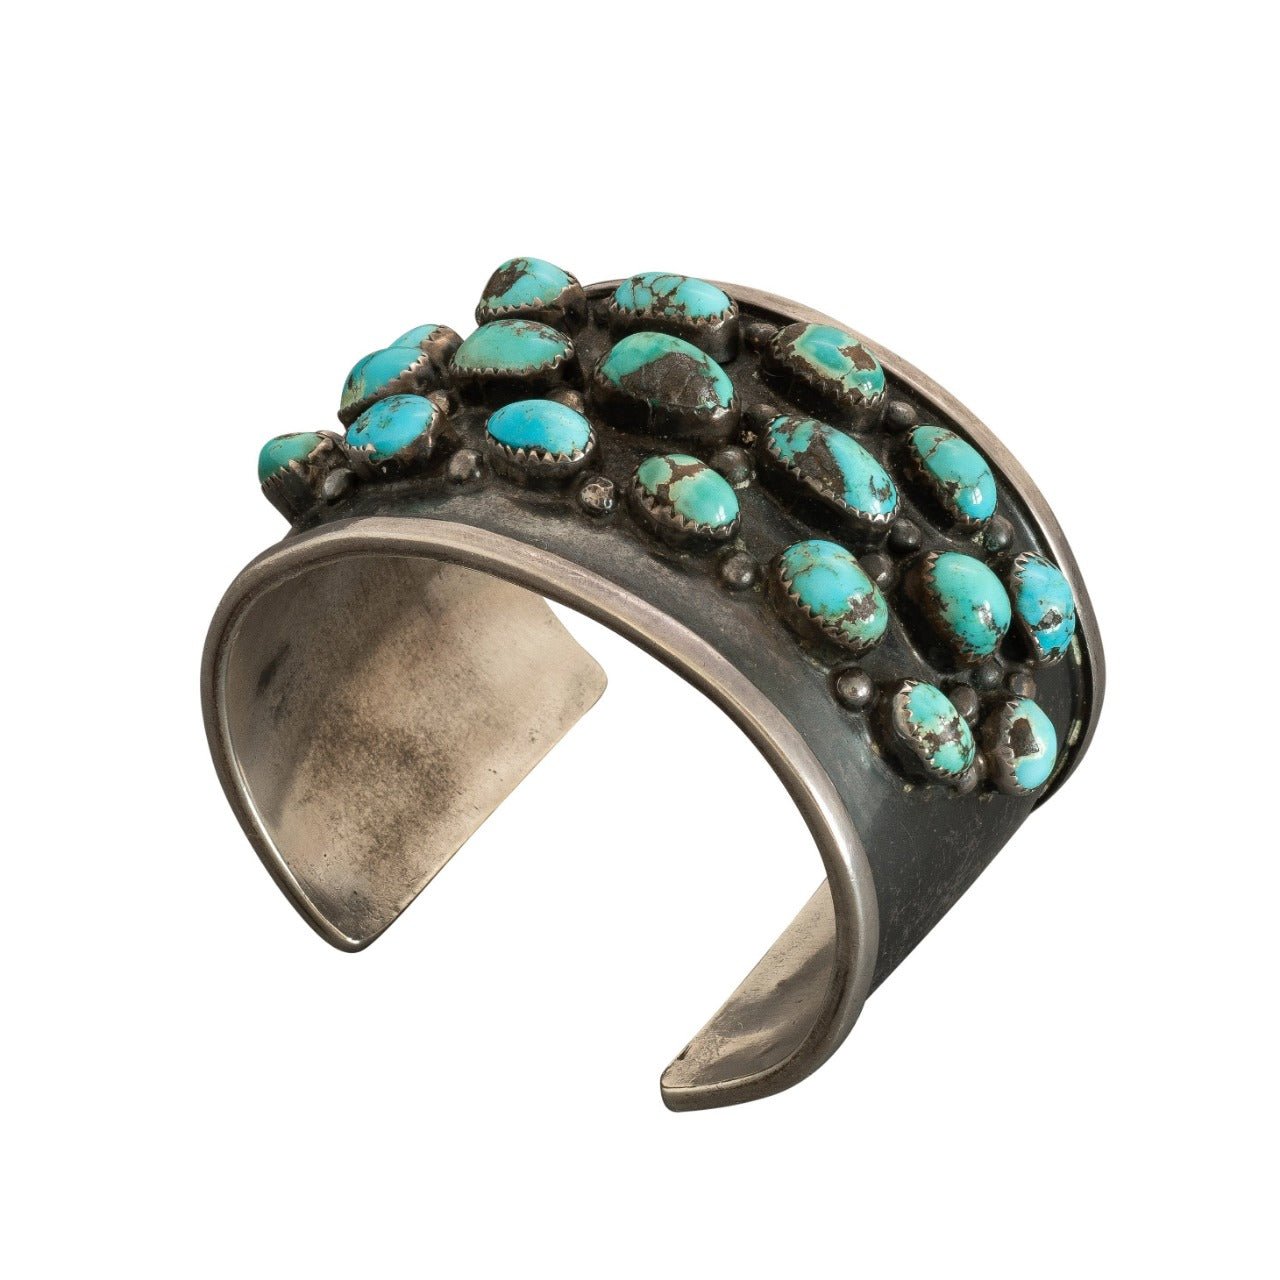 Vintage Wide Turquoise Cuff Of Multiple Stones in Sterling Silver - Turquoise & Tufa